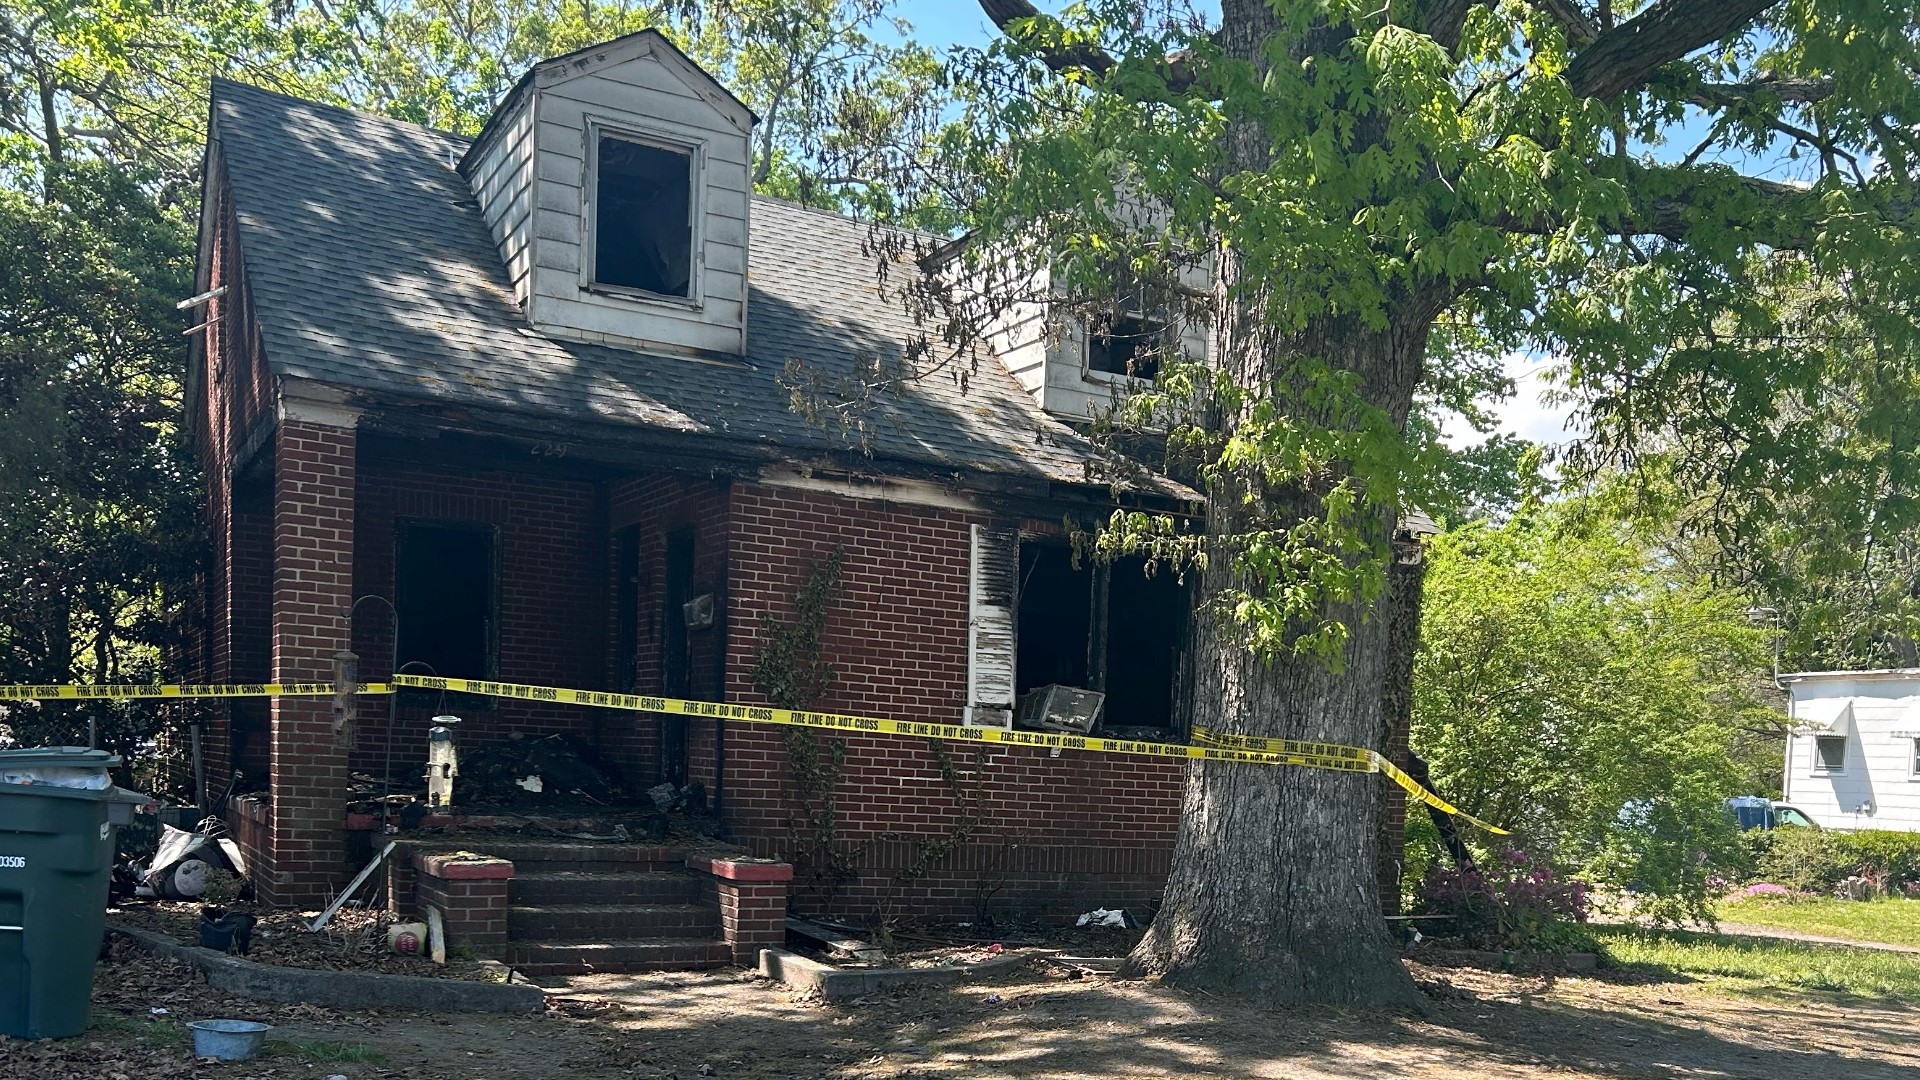 Flames tore through a home on Lasalle Avenue in Hampton early Thursday morning, killing a man trapped inside.